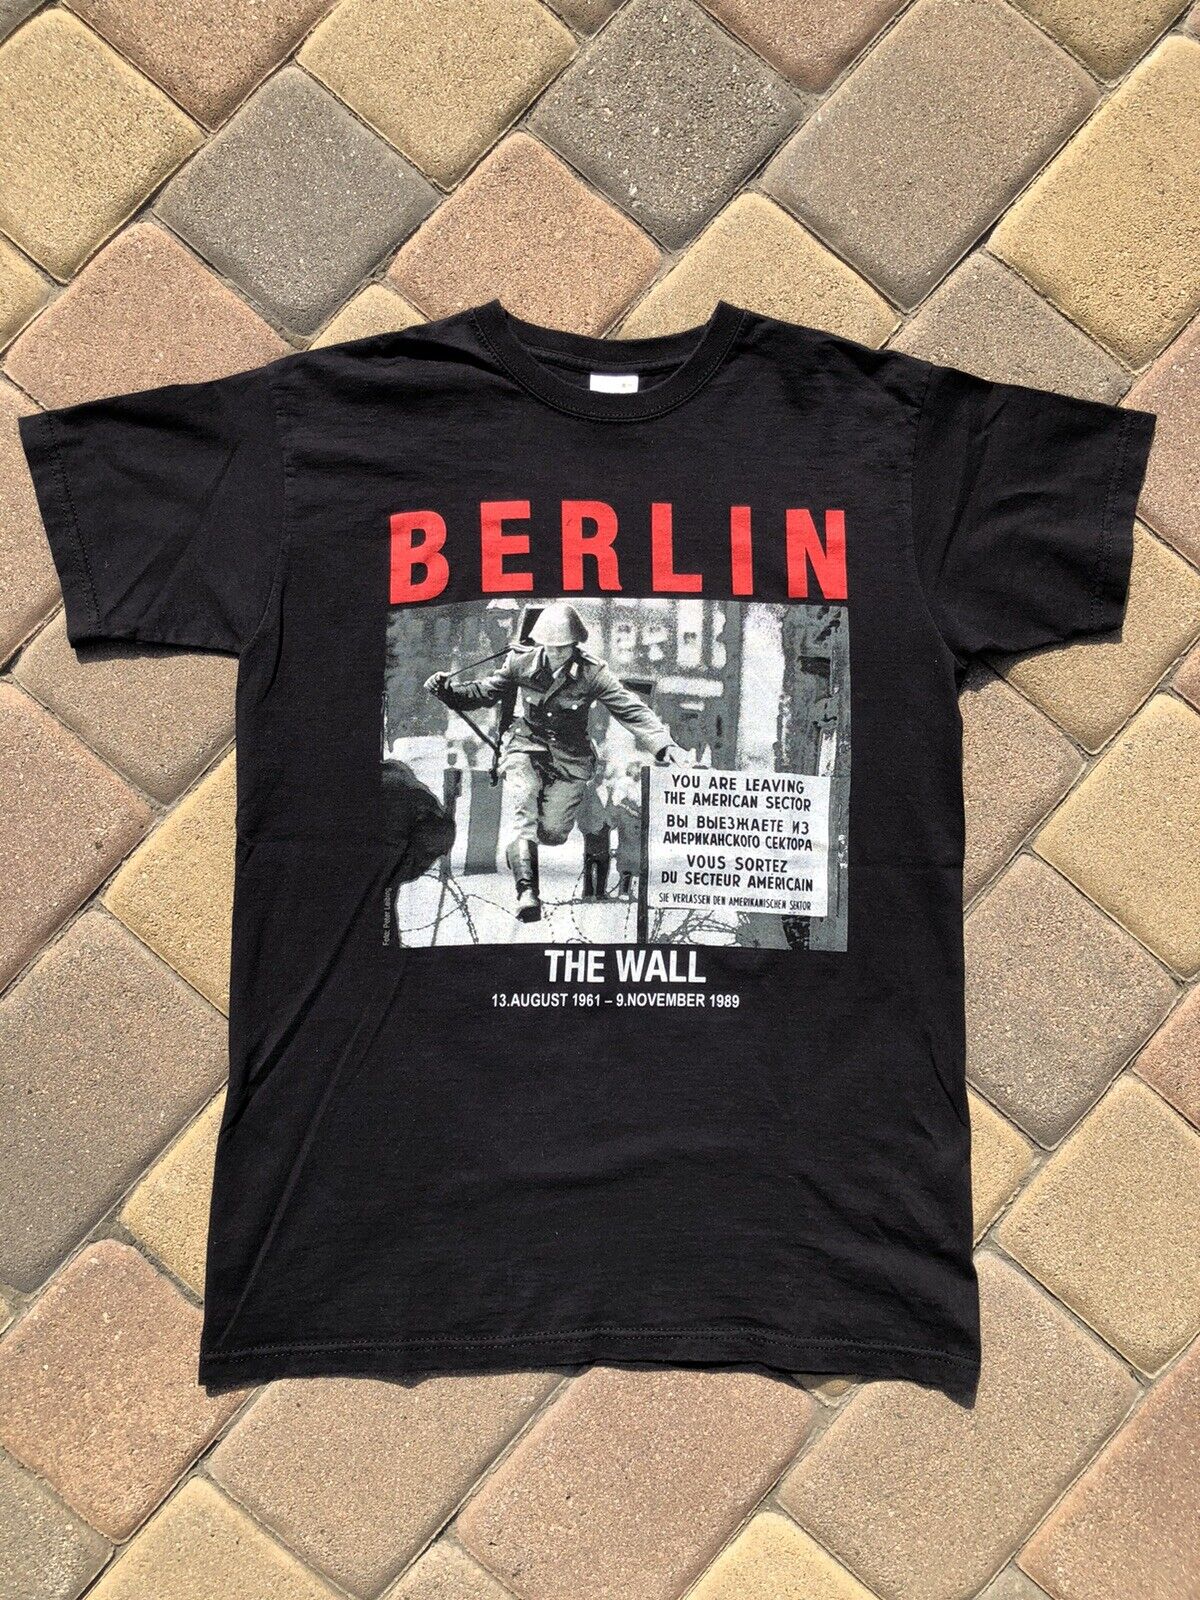 Berlin the wall 1961-1989 t shirt adult small